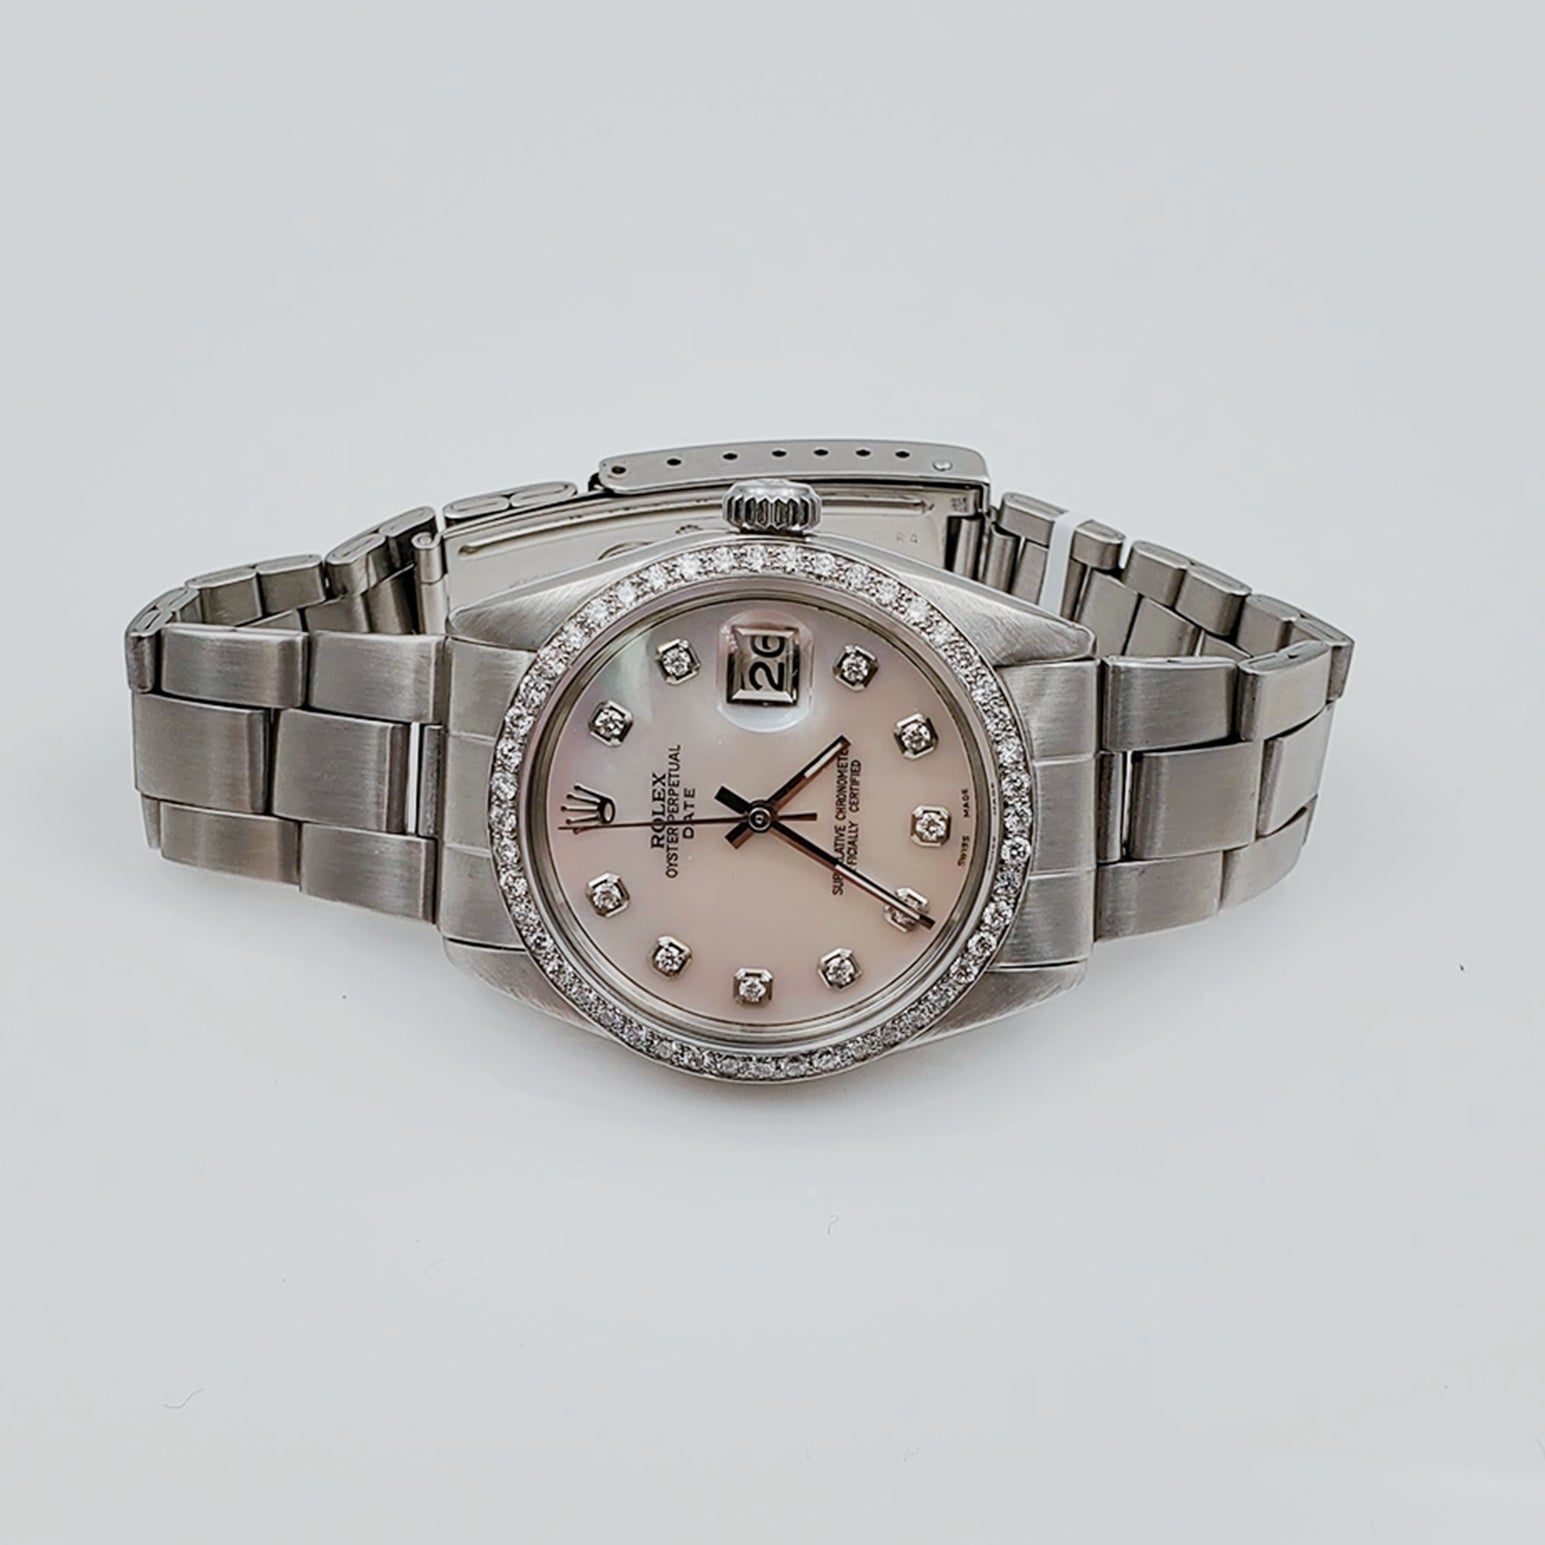 Men's Rolex 36mm Vintage DateJust Stainless Steel Oyster Band Watch with Mother of Pearl Diamond Dial and 18K White Gold Diamond Bezel. (Pre-Owned)